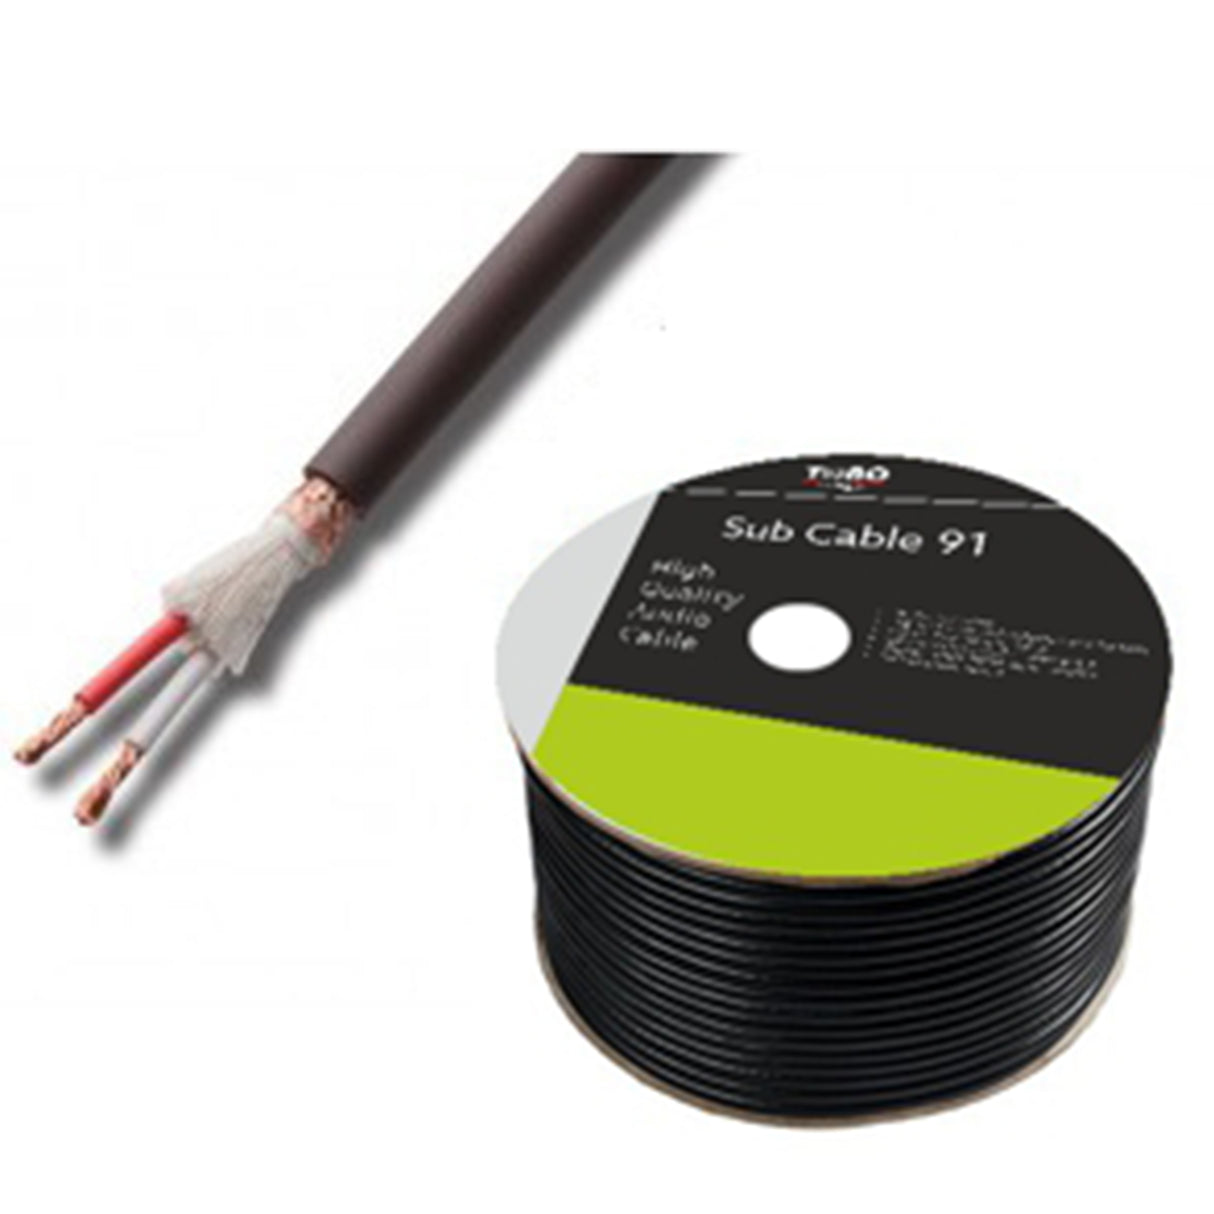 Tono Subcable 91 Subwoofer Cable (91 Meter Spool)